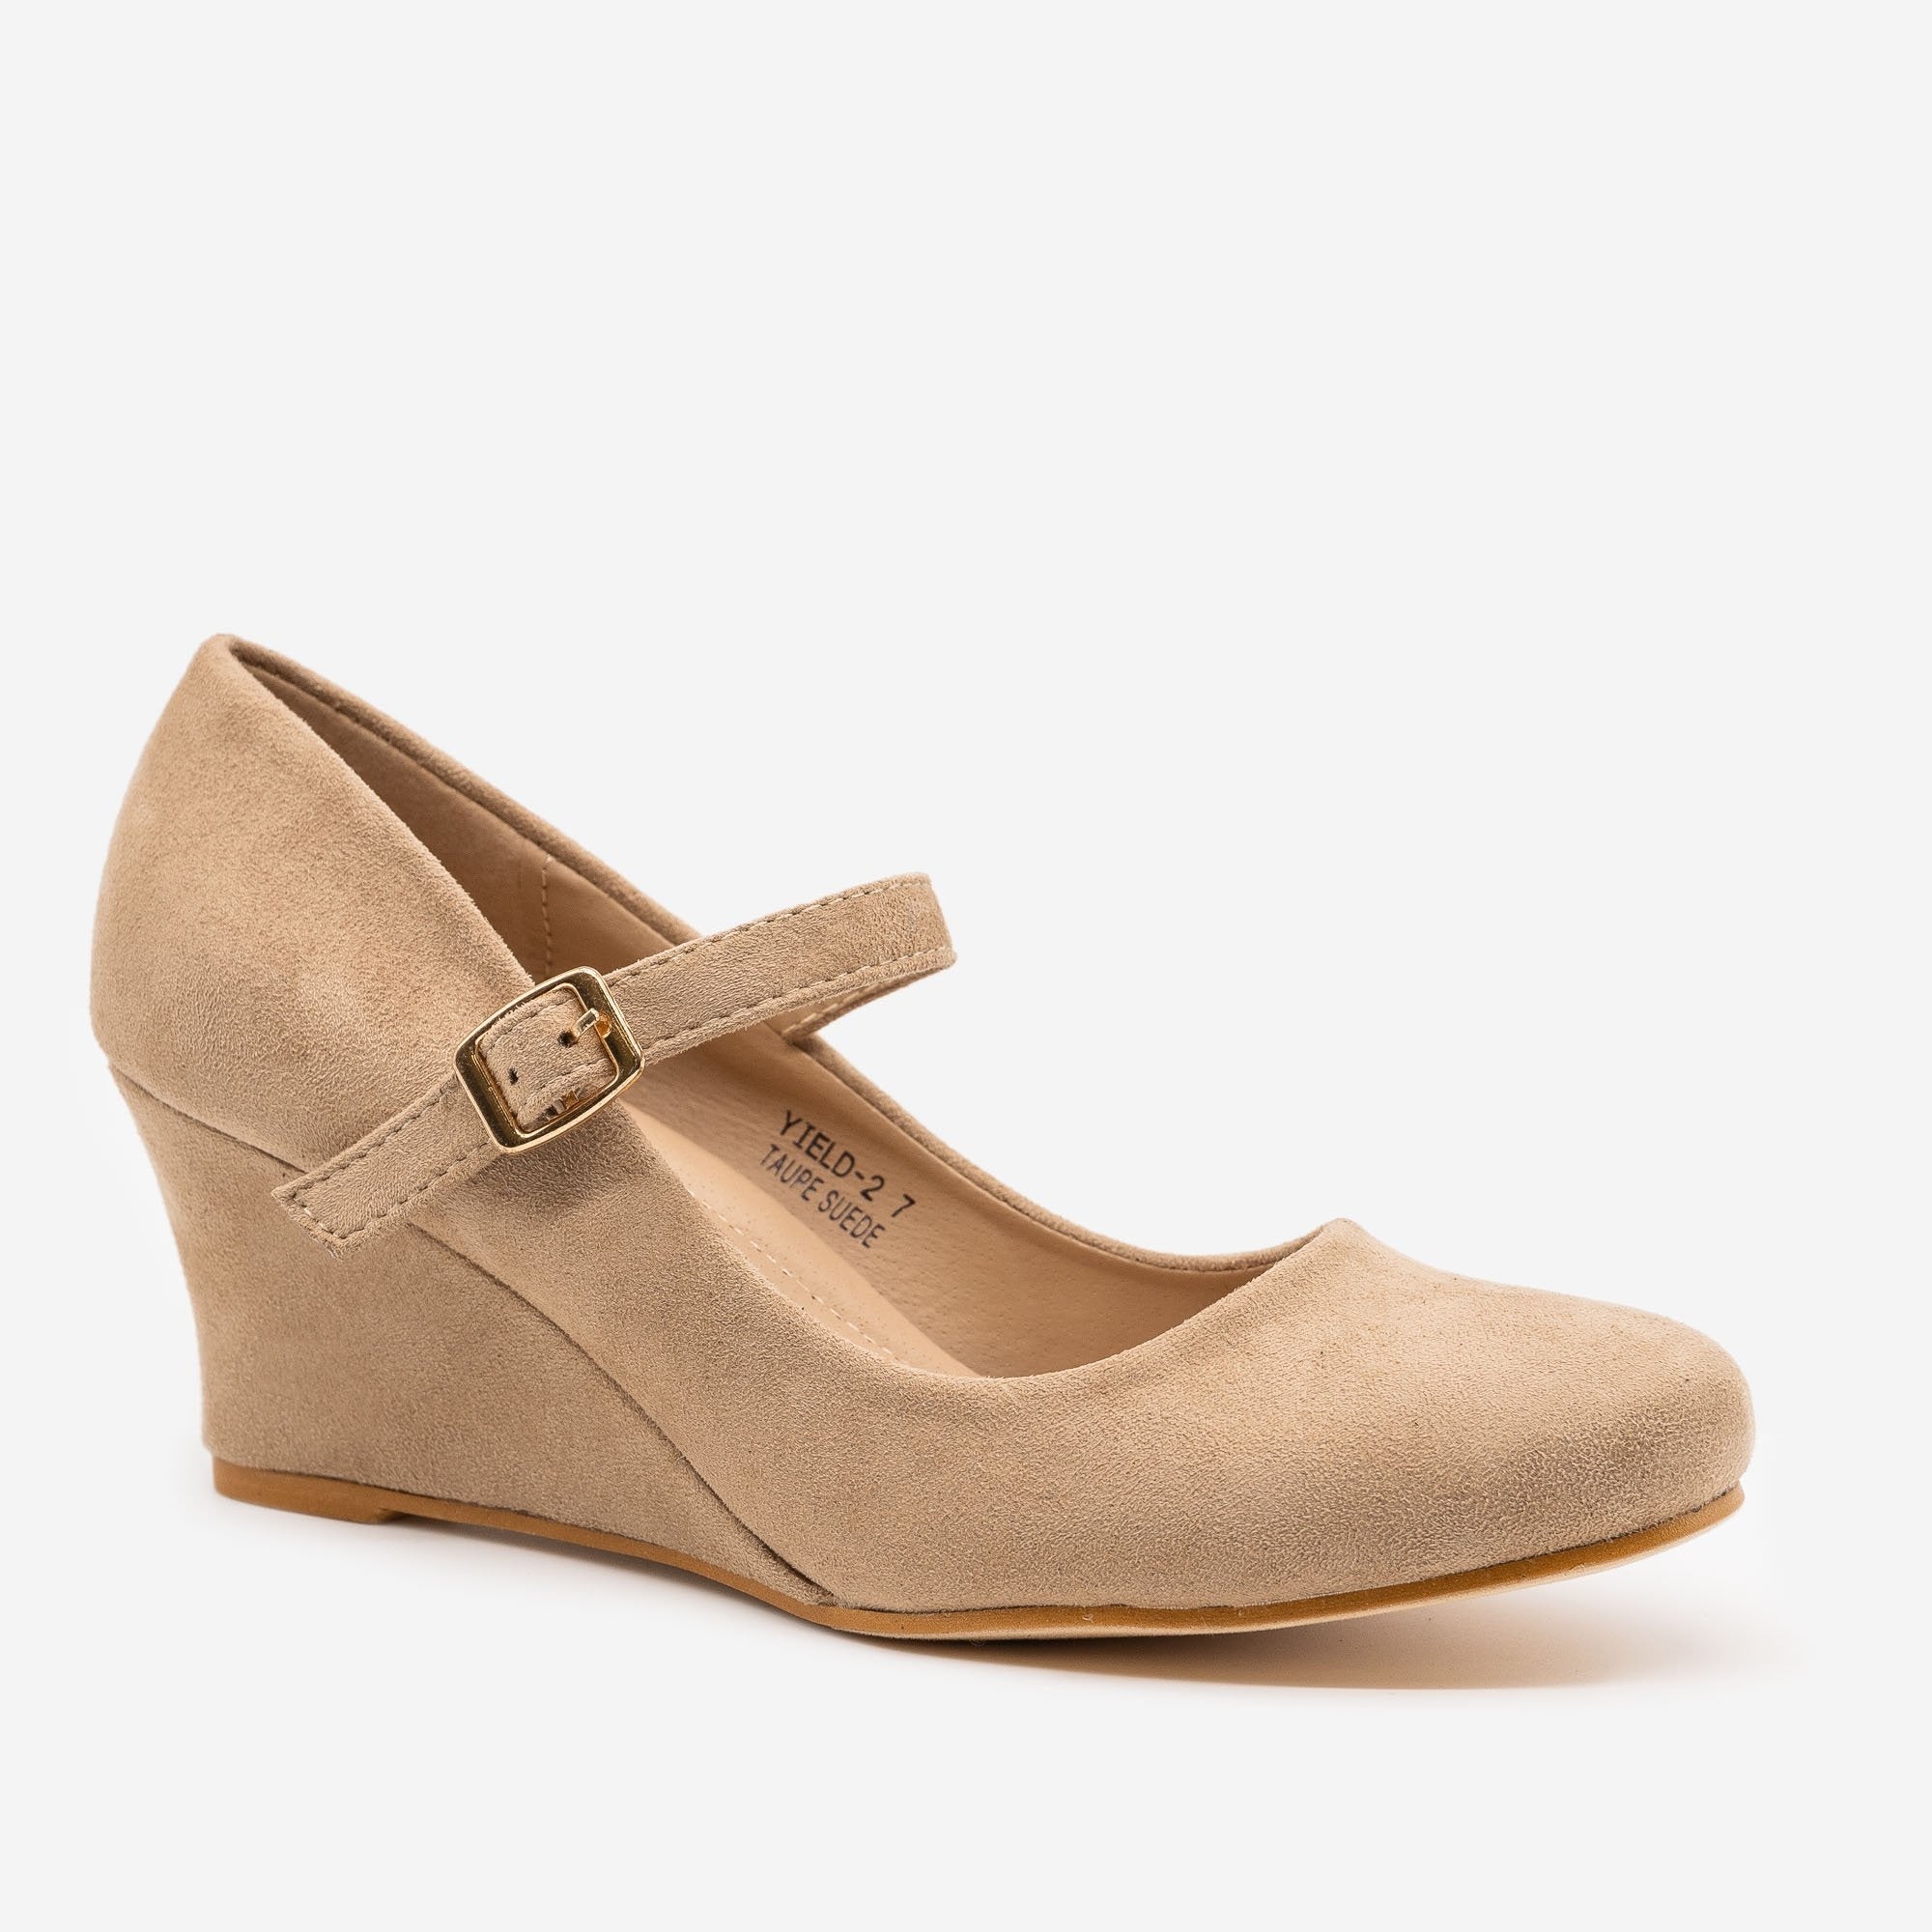 Mary Jane Wedge Heels - Anna Shoes 